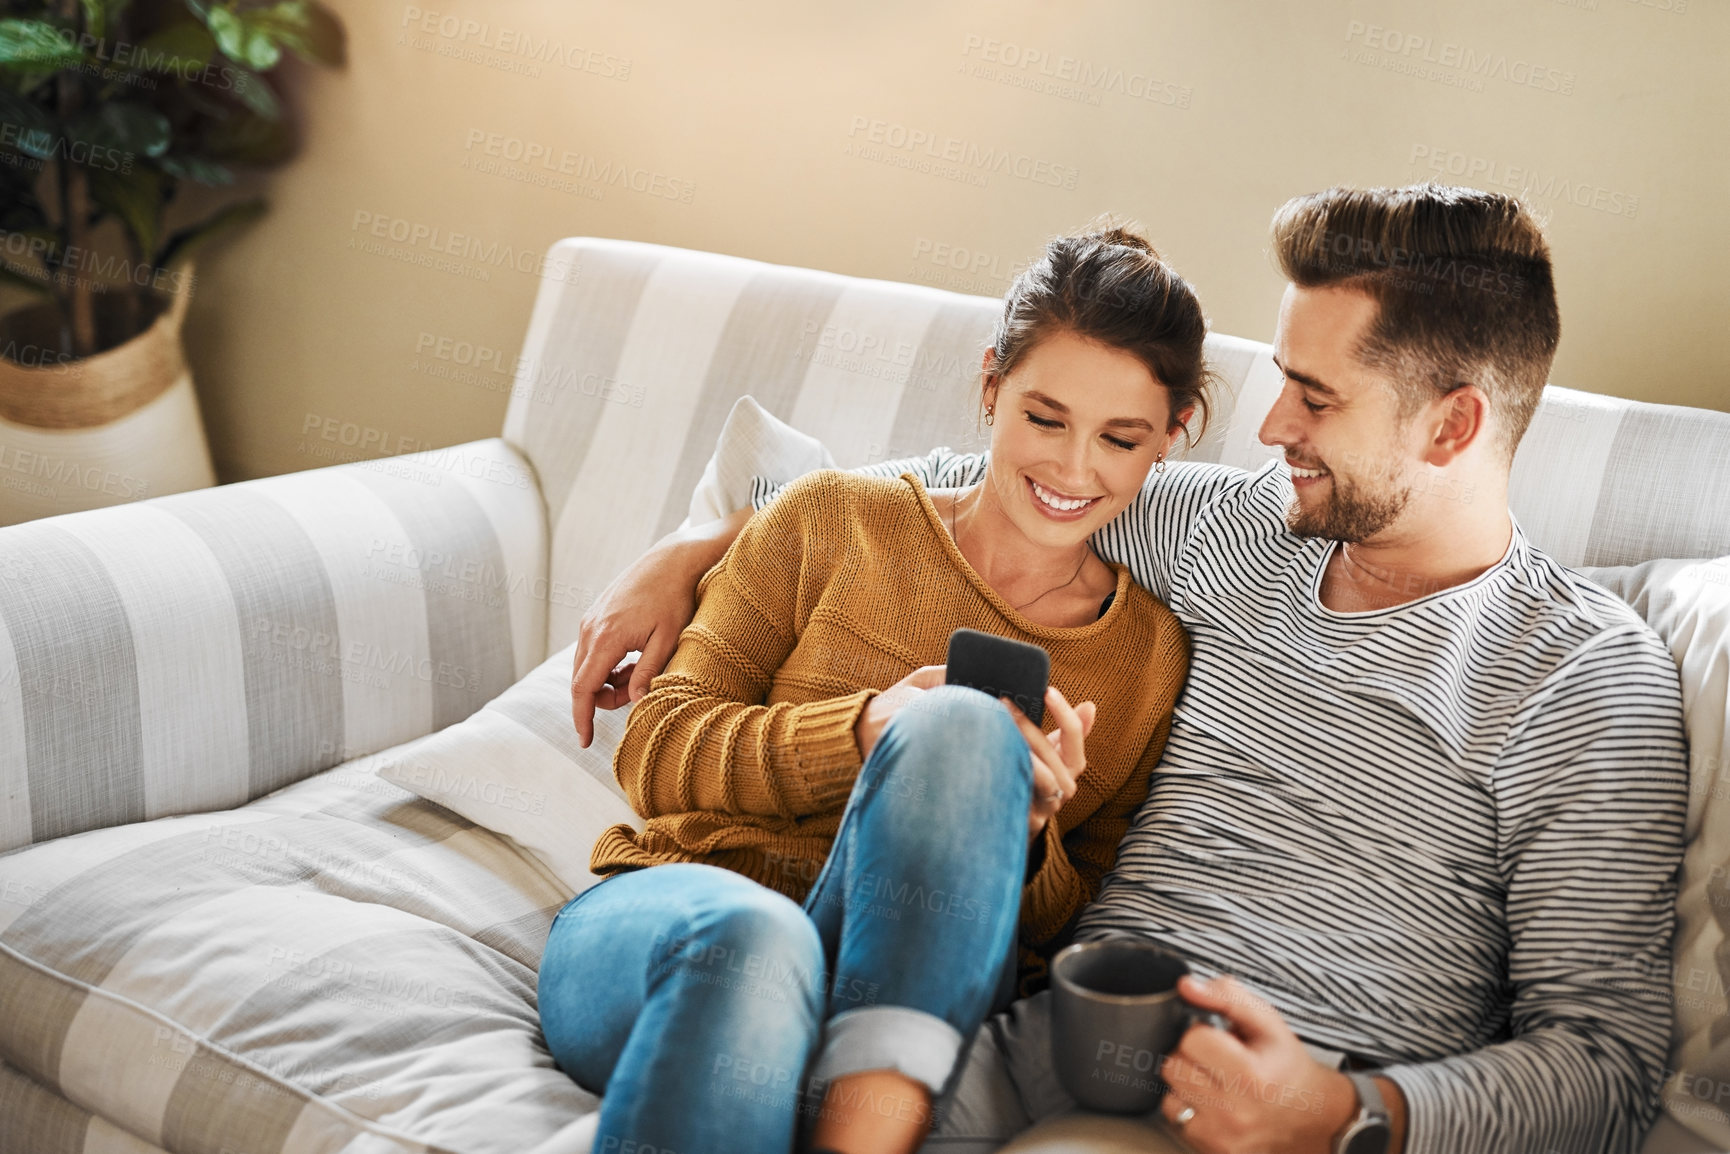 Buy stock photo Shot of a young couple using a cellphone while relaxing on the sofa at home